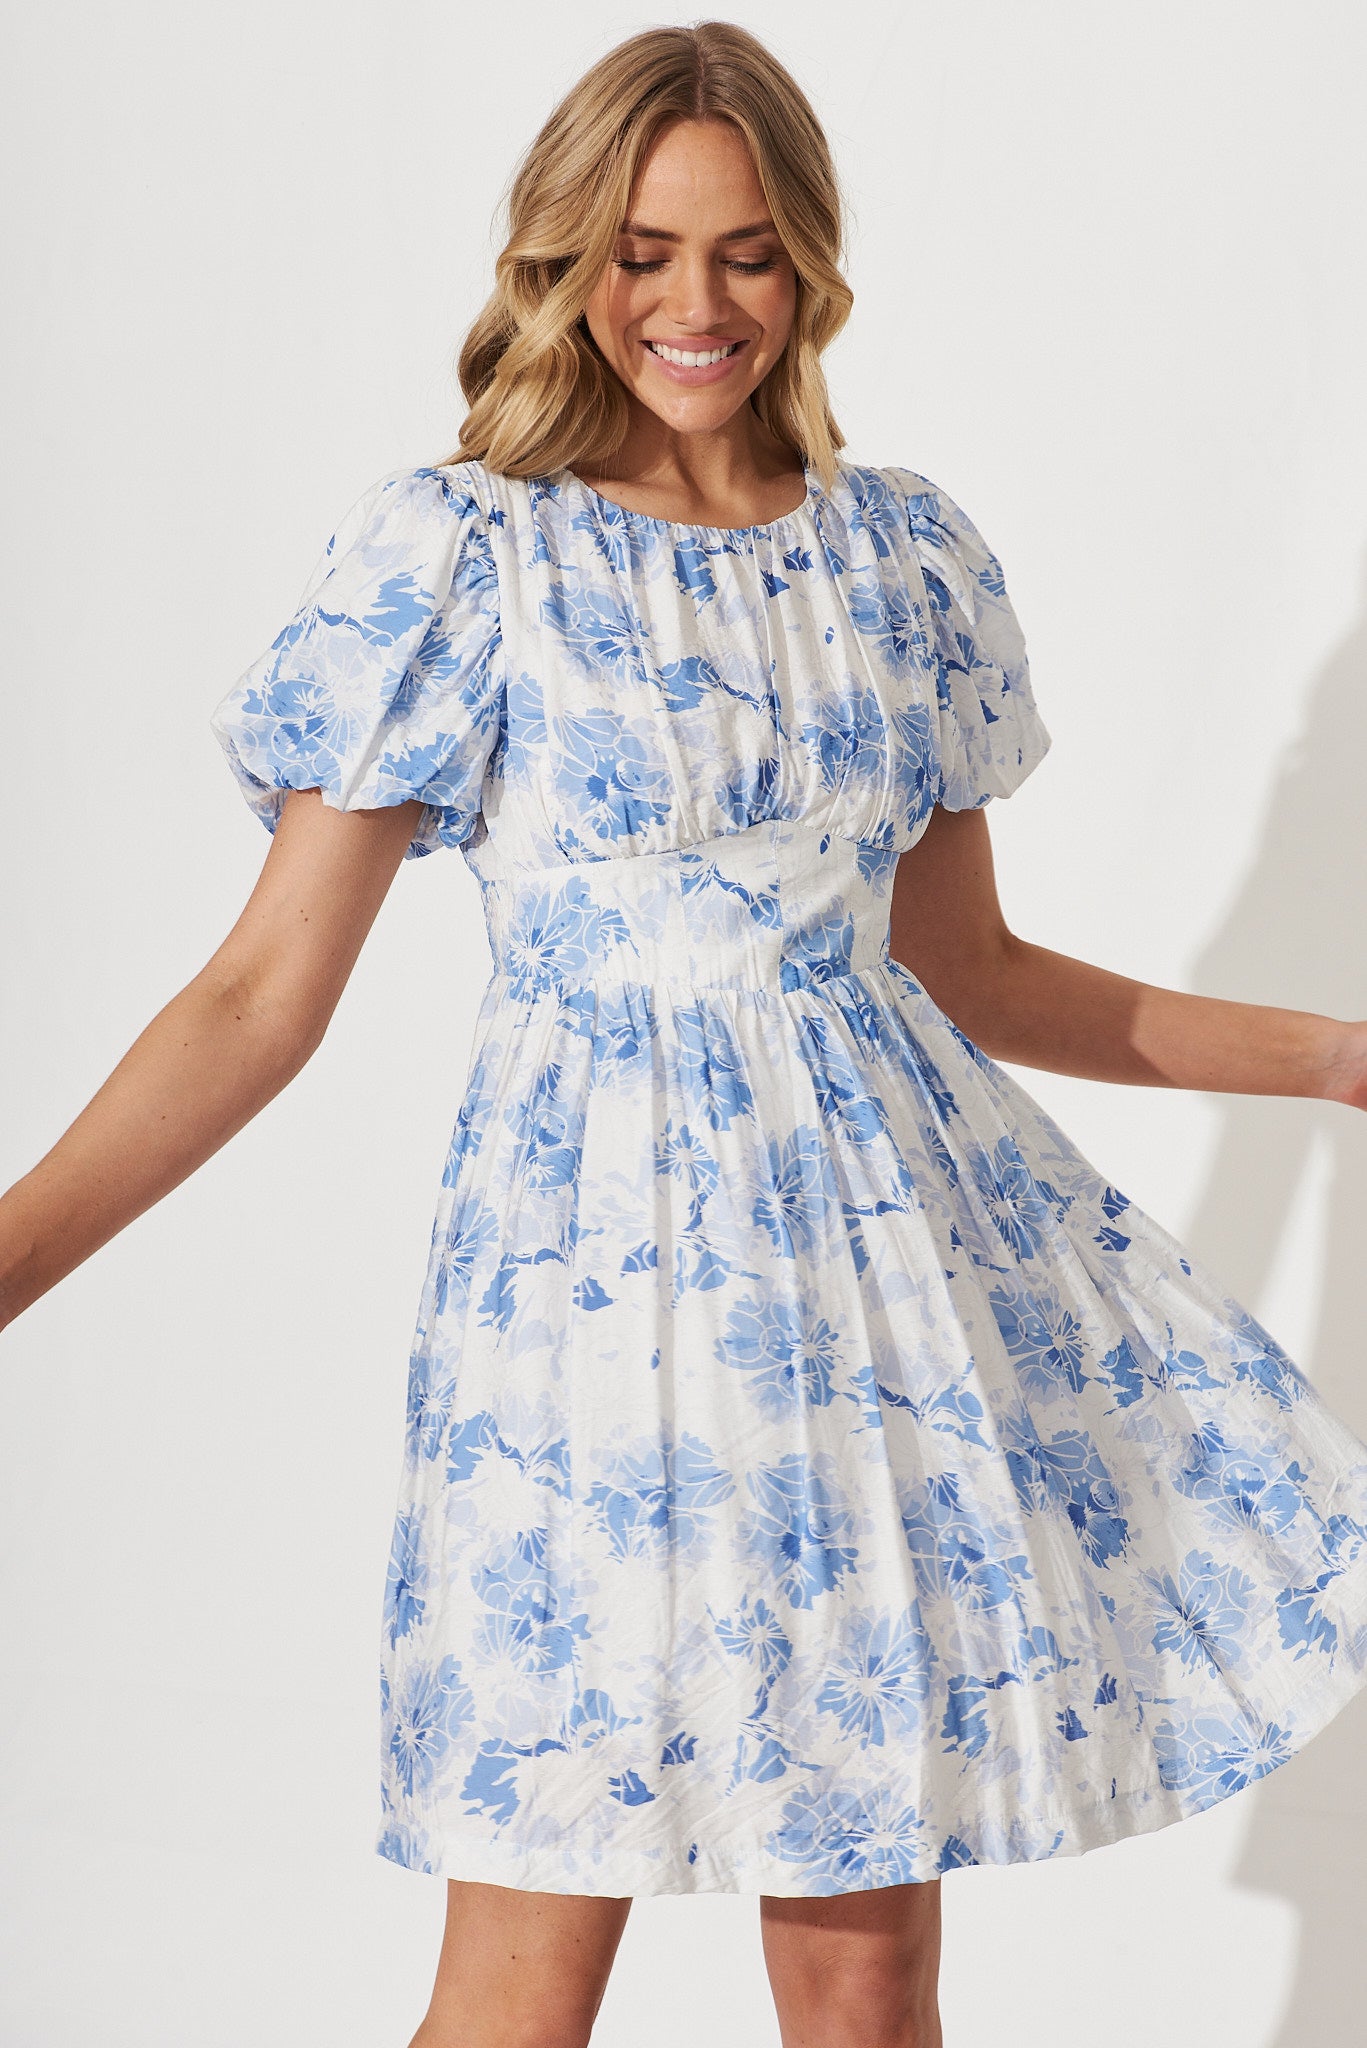 Audrey Dress In White With Blue Floral Cotton Blend - front